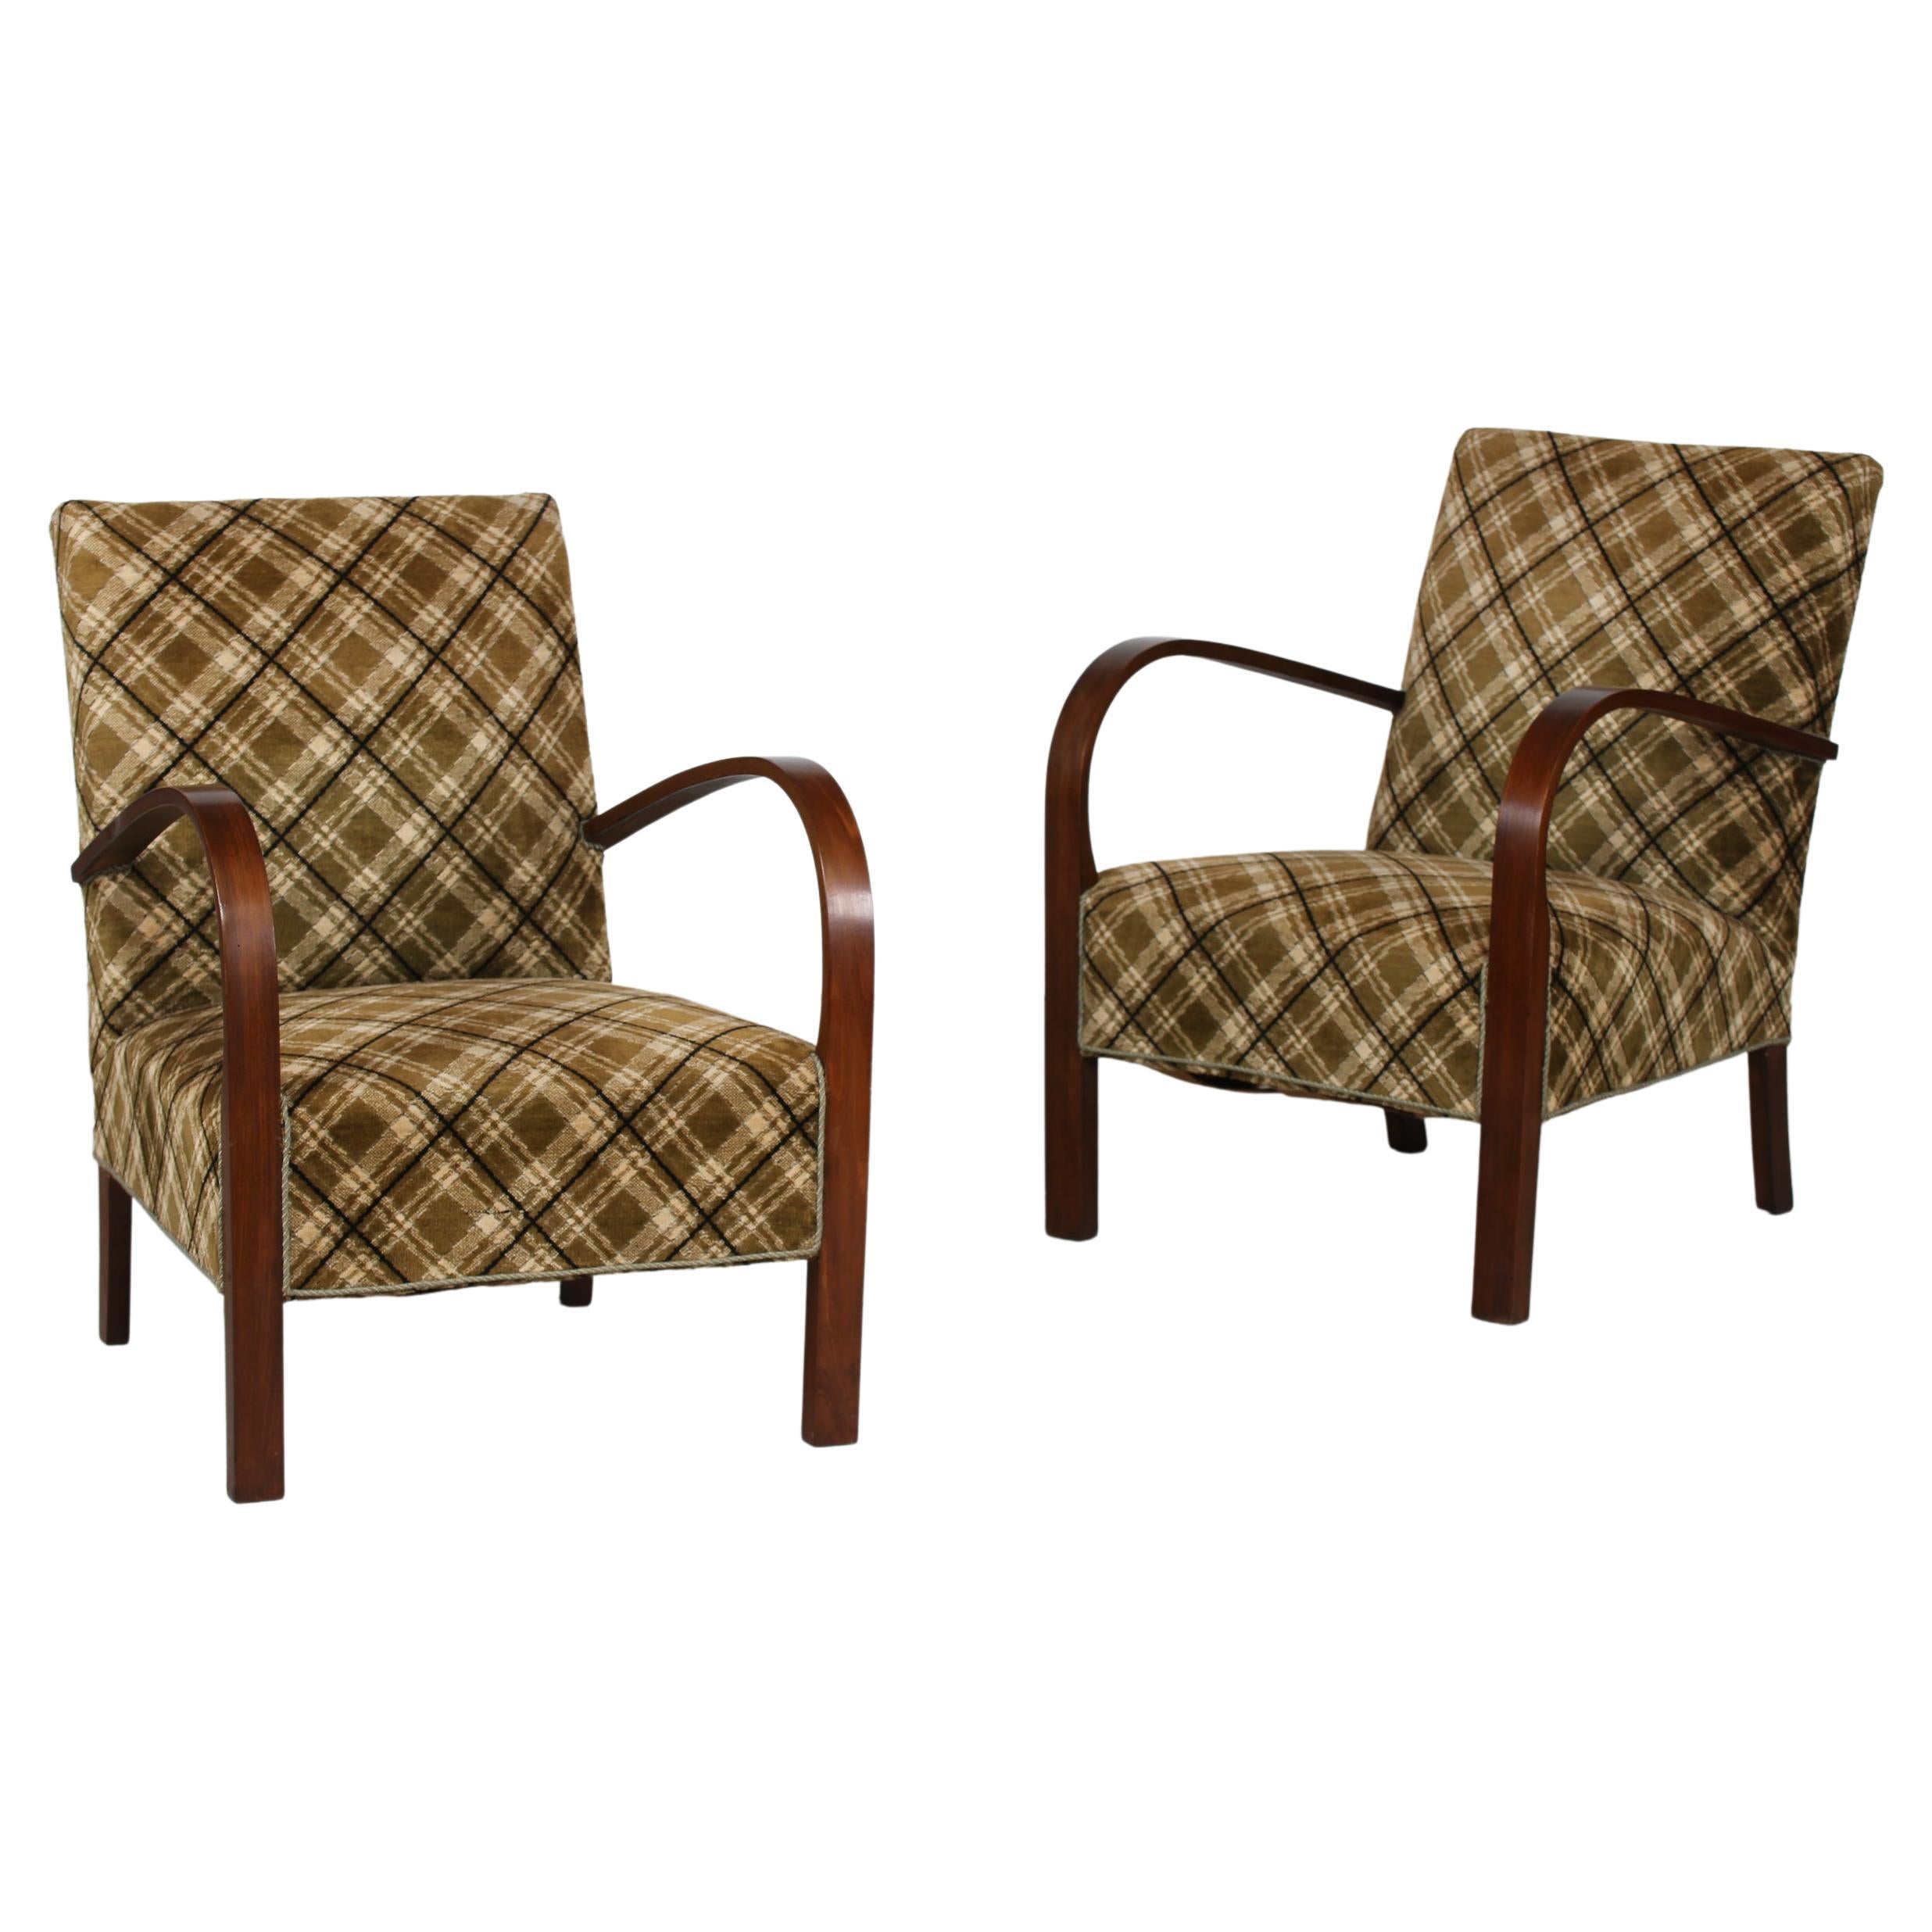 Danish Art Deco 2 Club Chairs Almost Identical of Dark Wood and Velour, 1940s For Sale